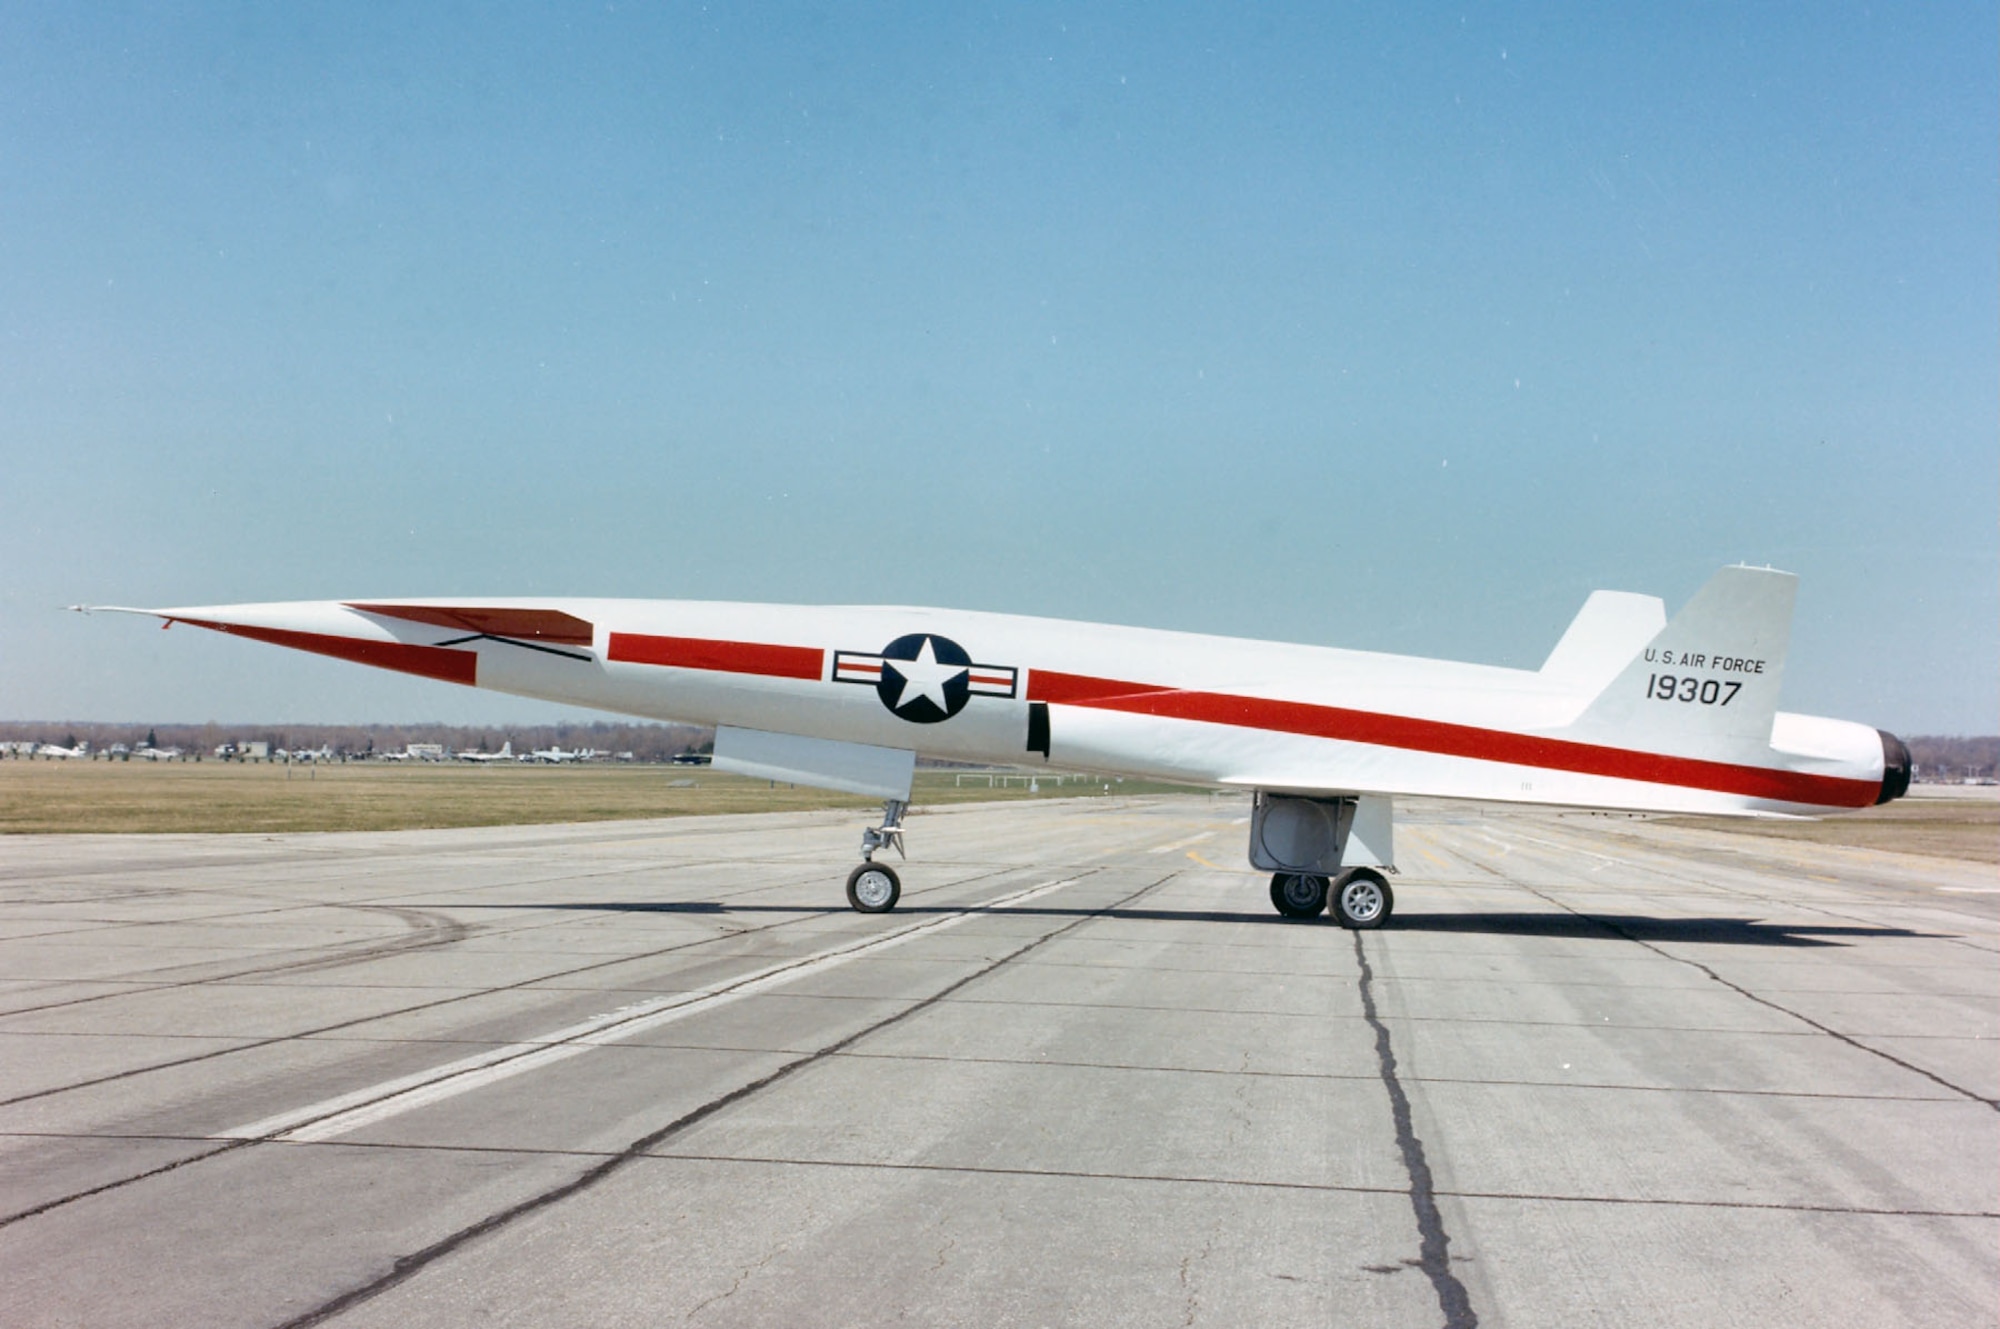 DAYTON, Ohio -- North American X-10 at the National Museum of the United States Air Force. (U.S. Air Force photo)